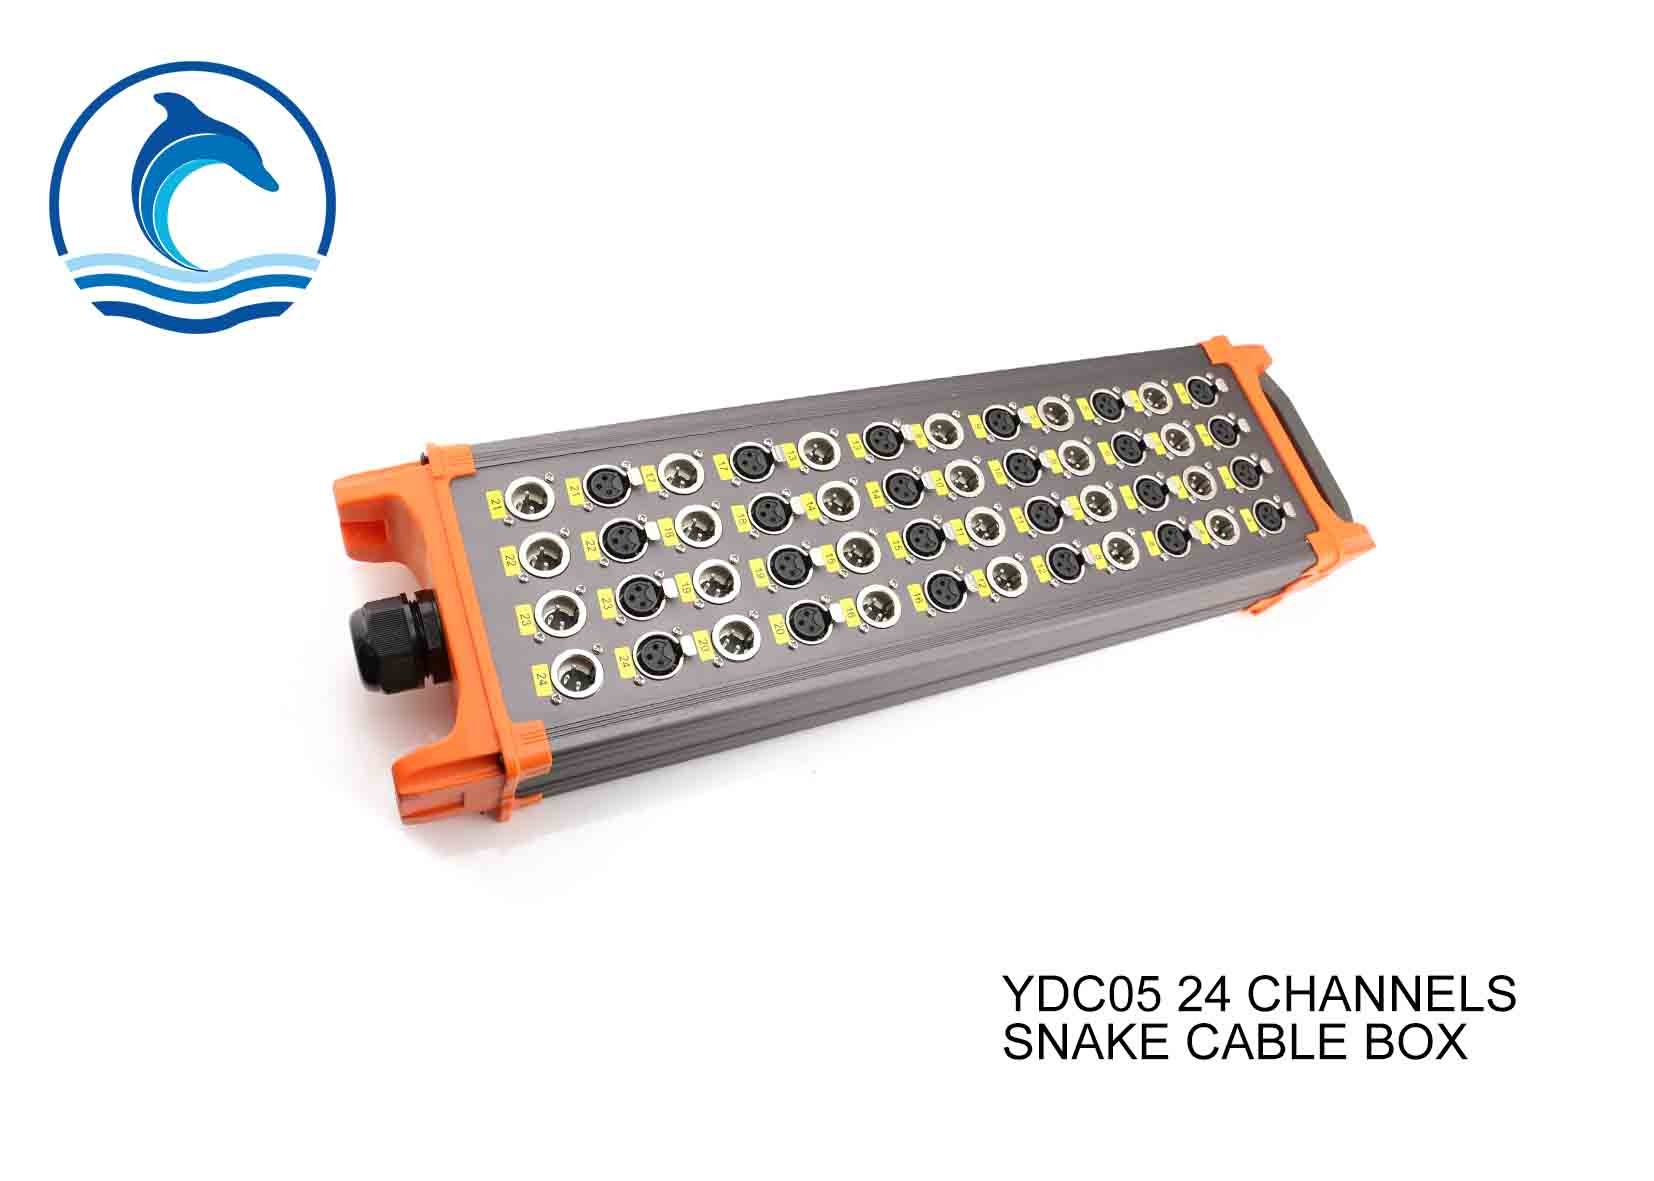 Best YDC05 Snake Cable Box 24 Channel Pro XLR Audio Snake Cable Stainless Steel Texture wholesale